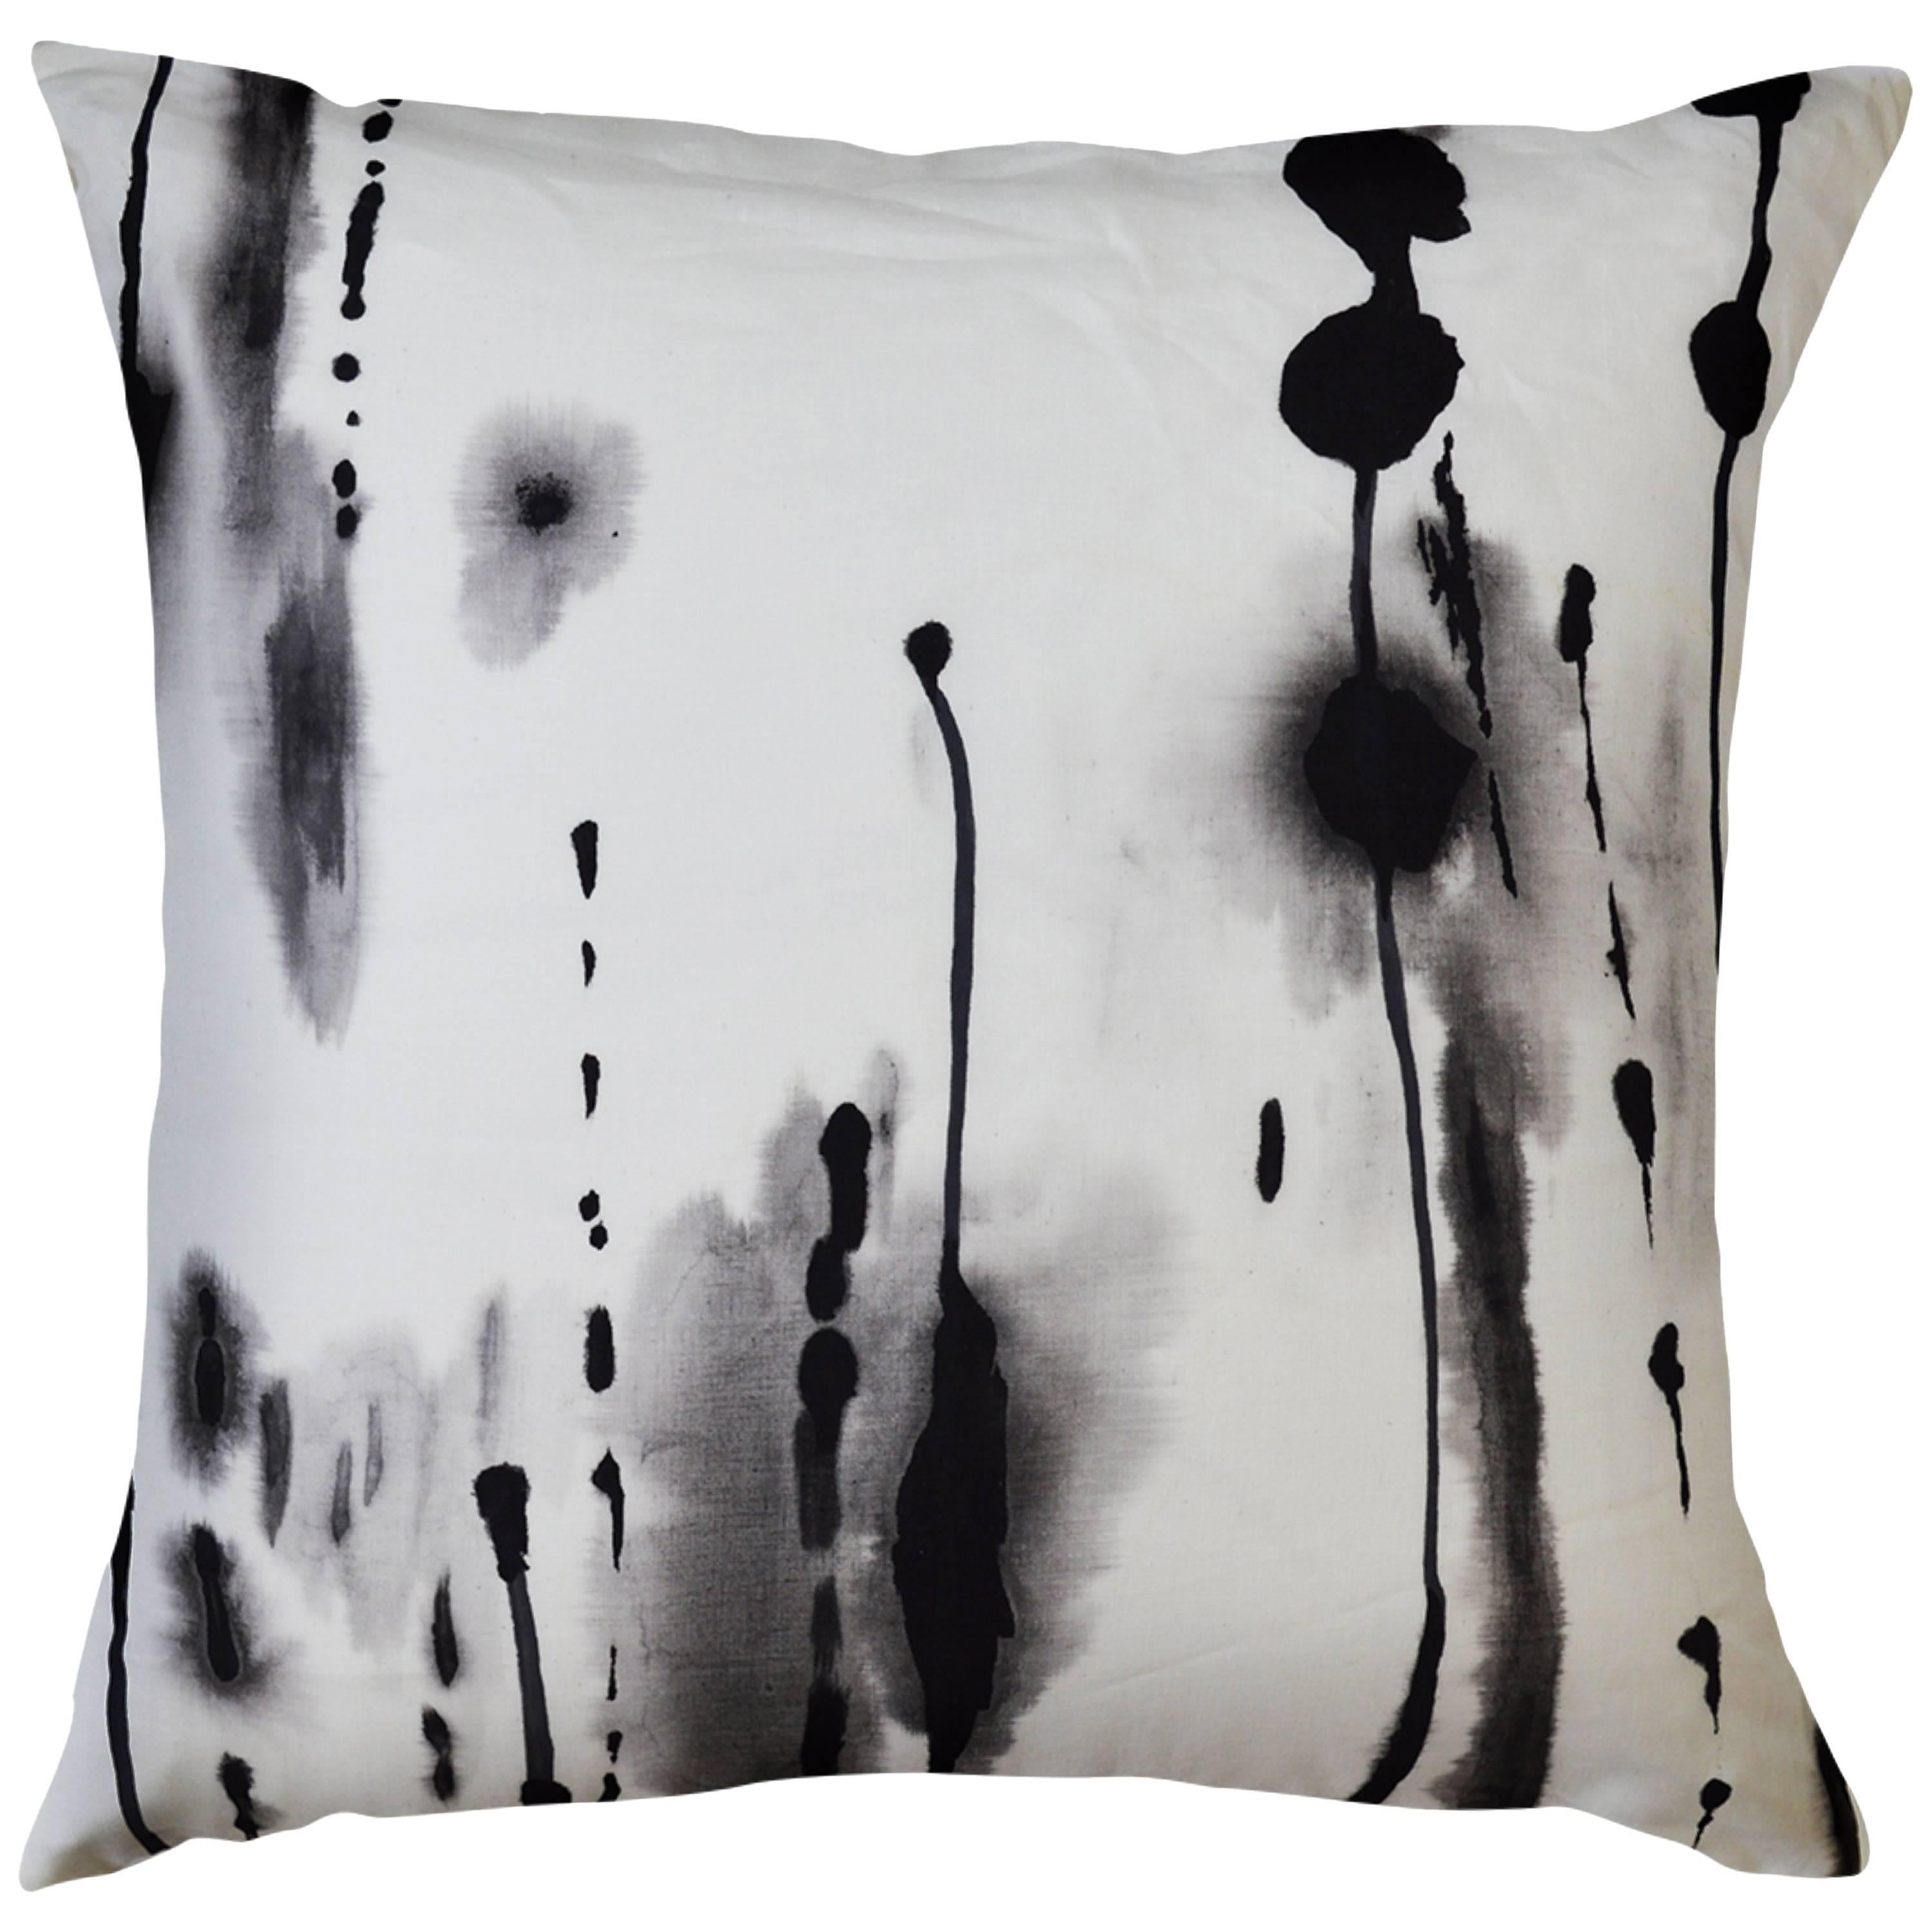 Ink, Contemporary One-of-a-Kind Black and White Ink Drips Handmade Linen Pillow For Sale